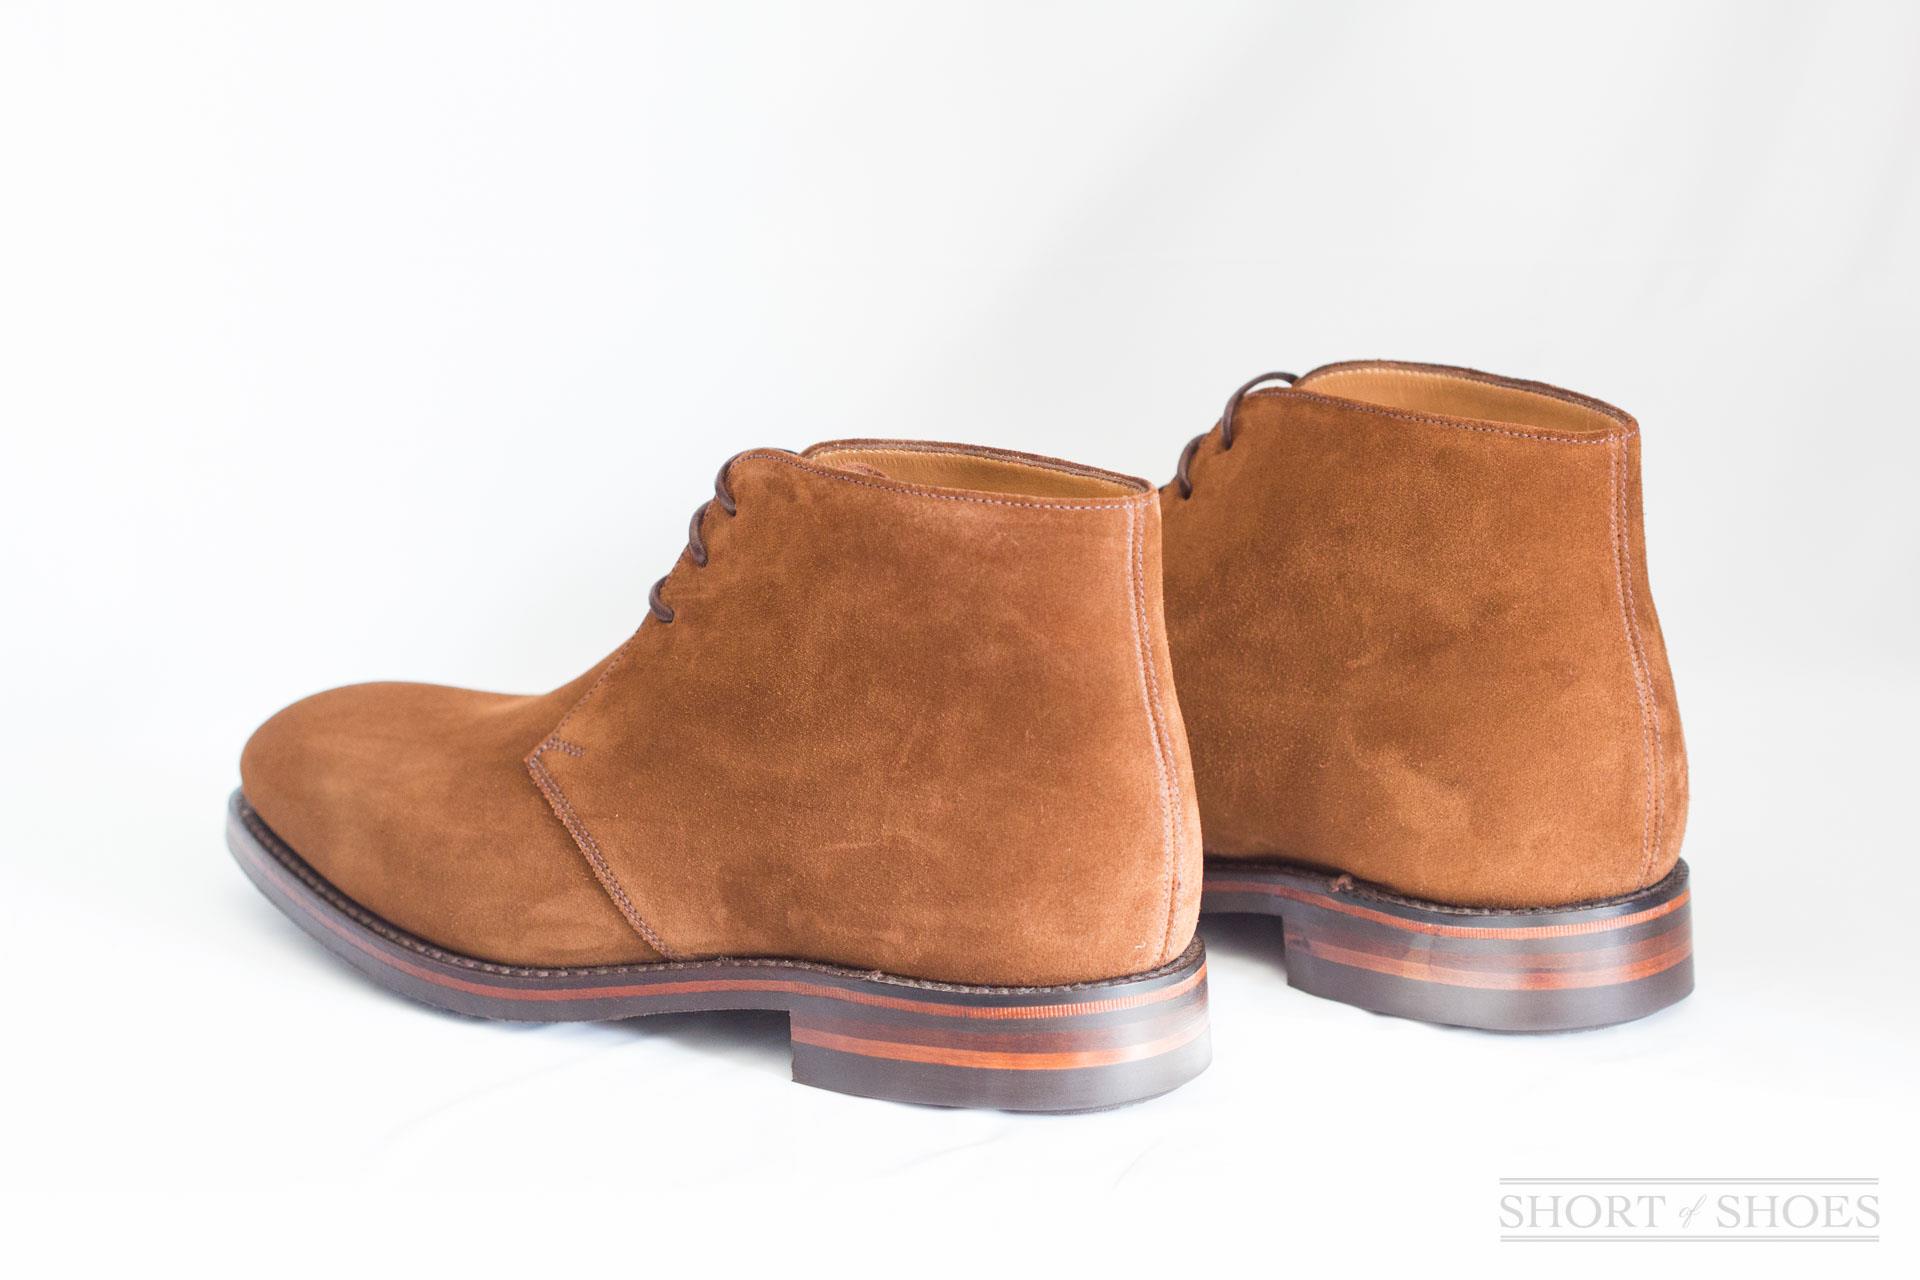 loake boots review